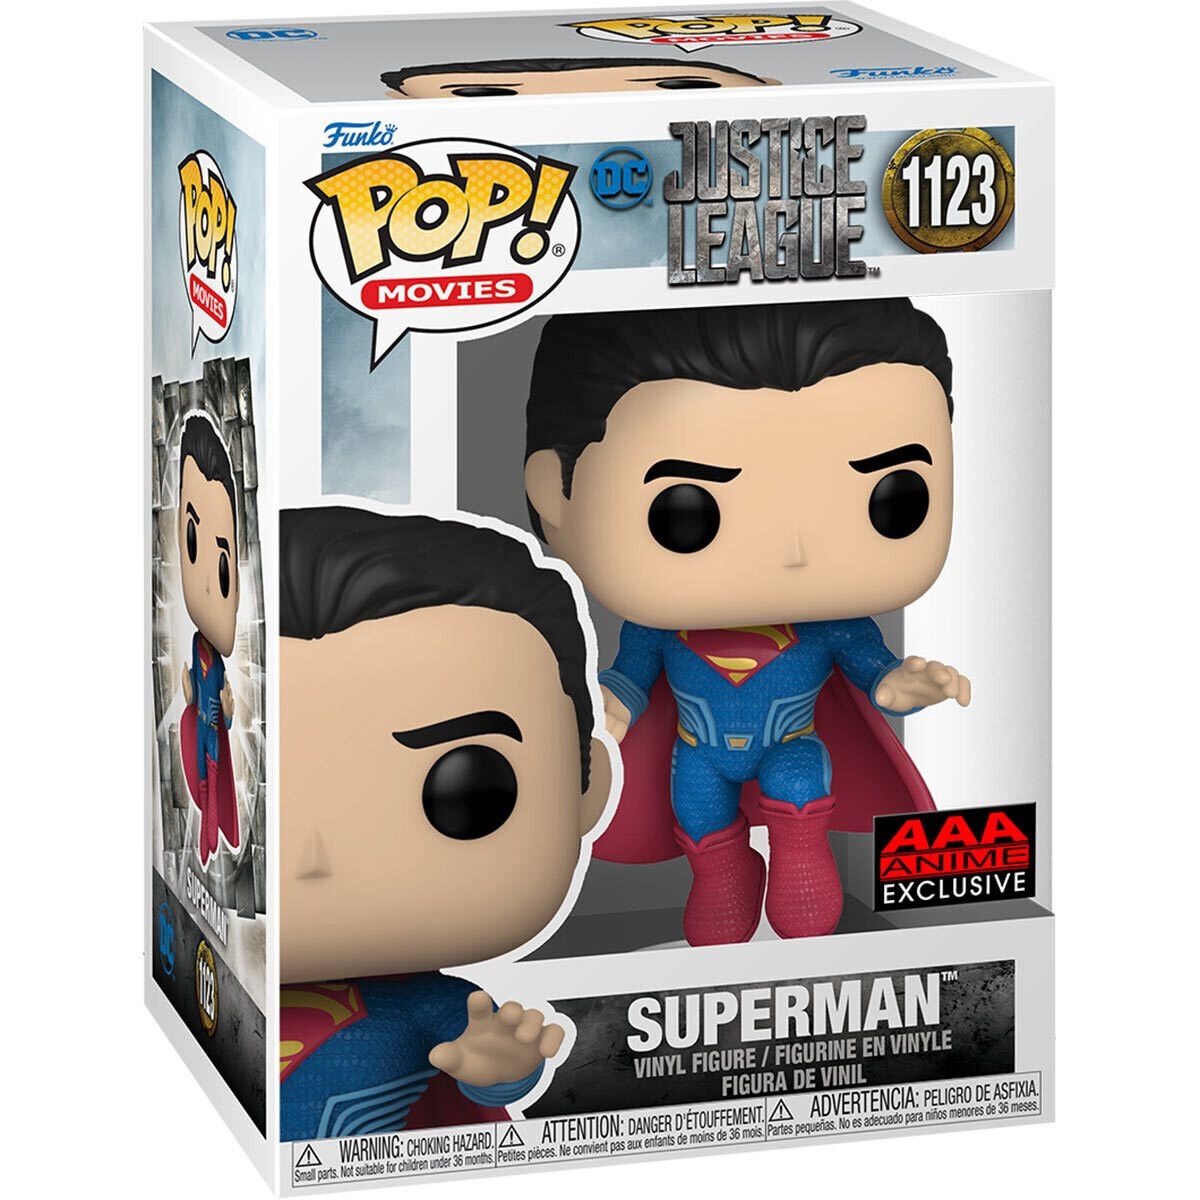 Funko Pop Movies Justice League - Superman Exclusive AAA # 112364927